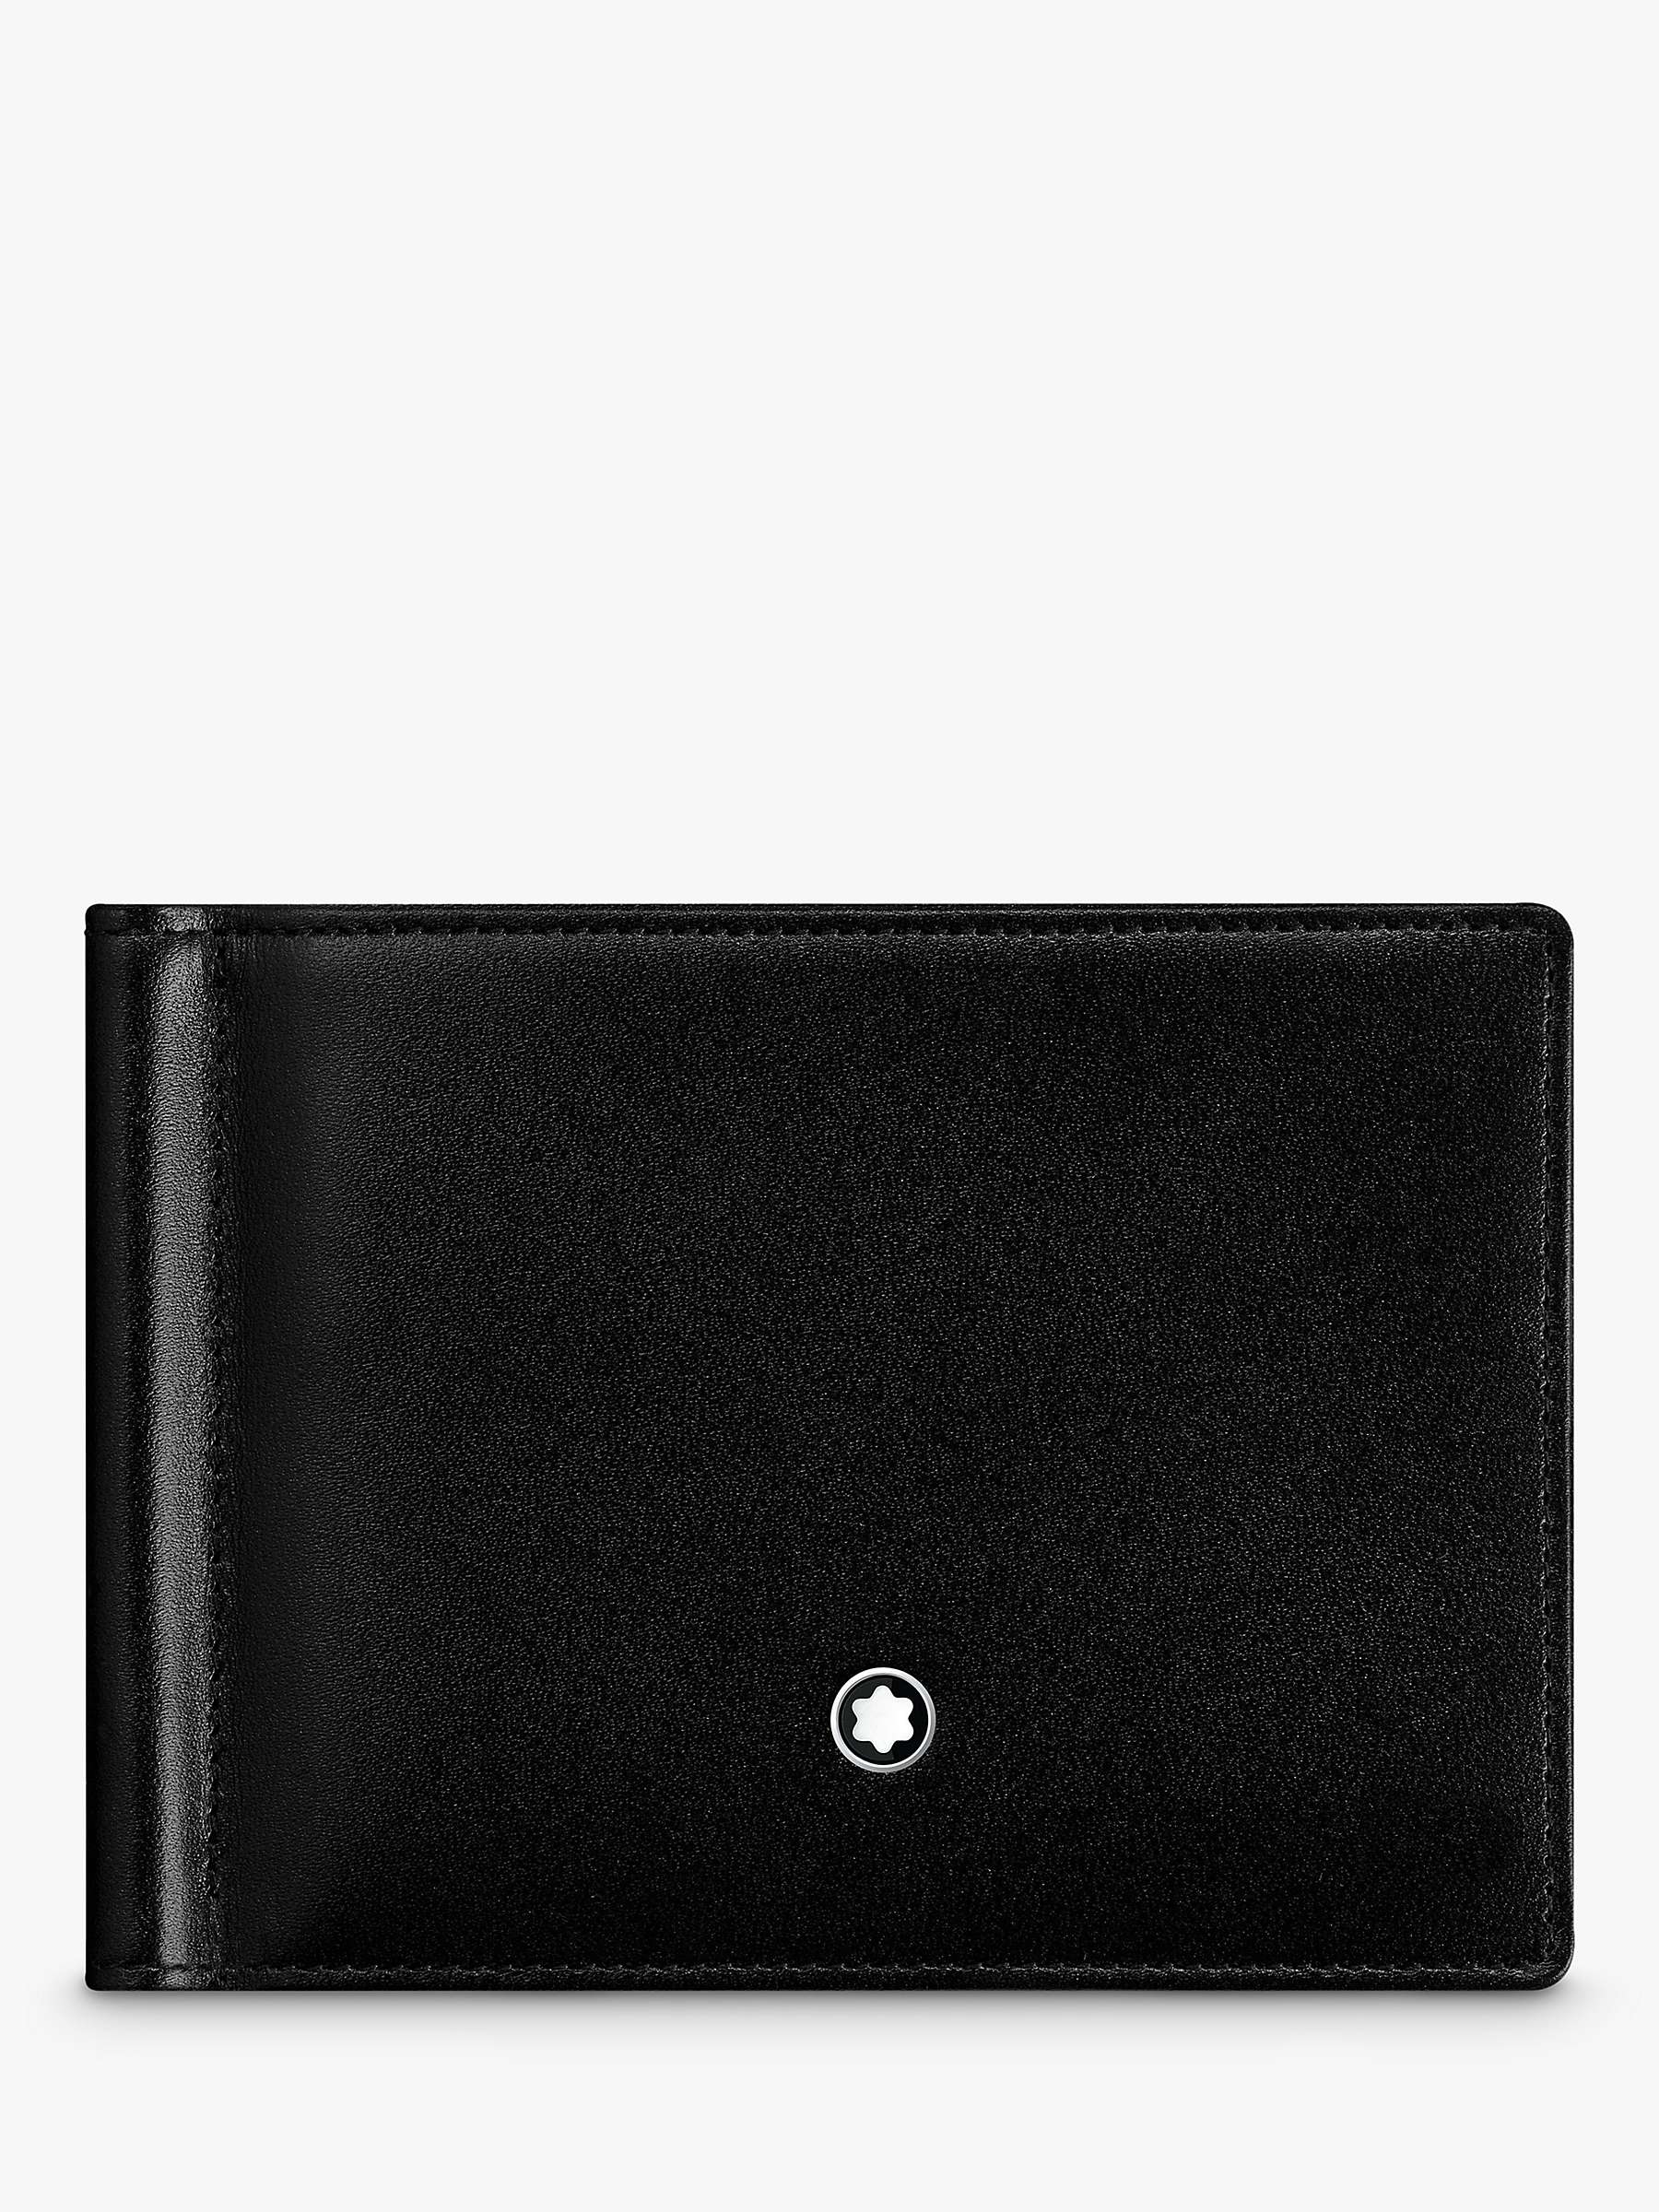 Buy Montblanc 6 Card Leather Wallet with Money Clip, Black Online at johnlewis.com